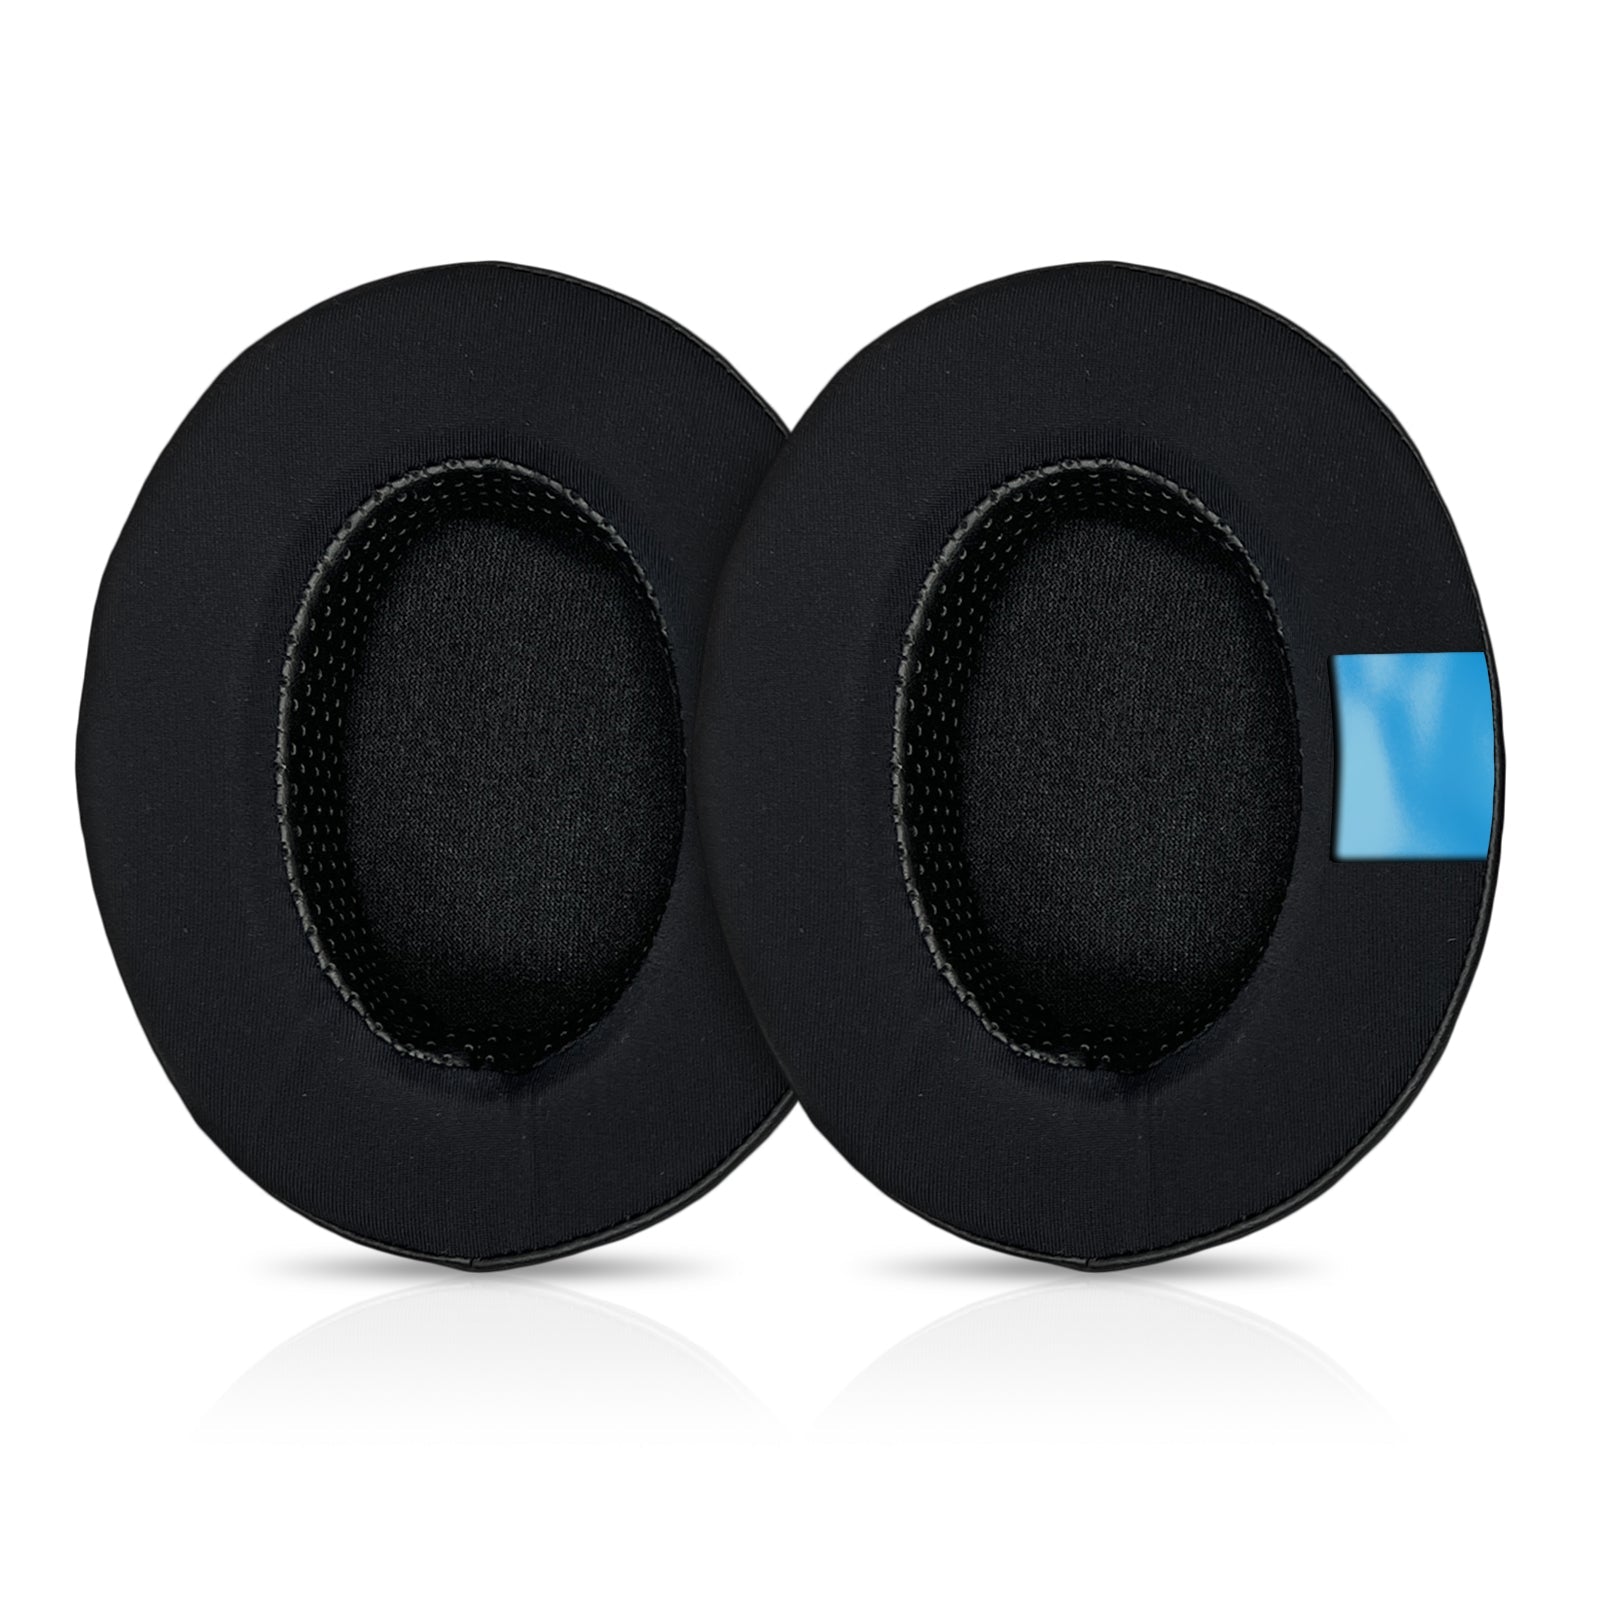 CentralSound Coolers XL Cooling Gel and Memory Foam Oval Ear Pad Cushions - CentralSound